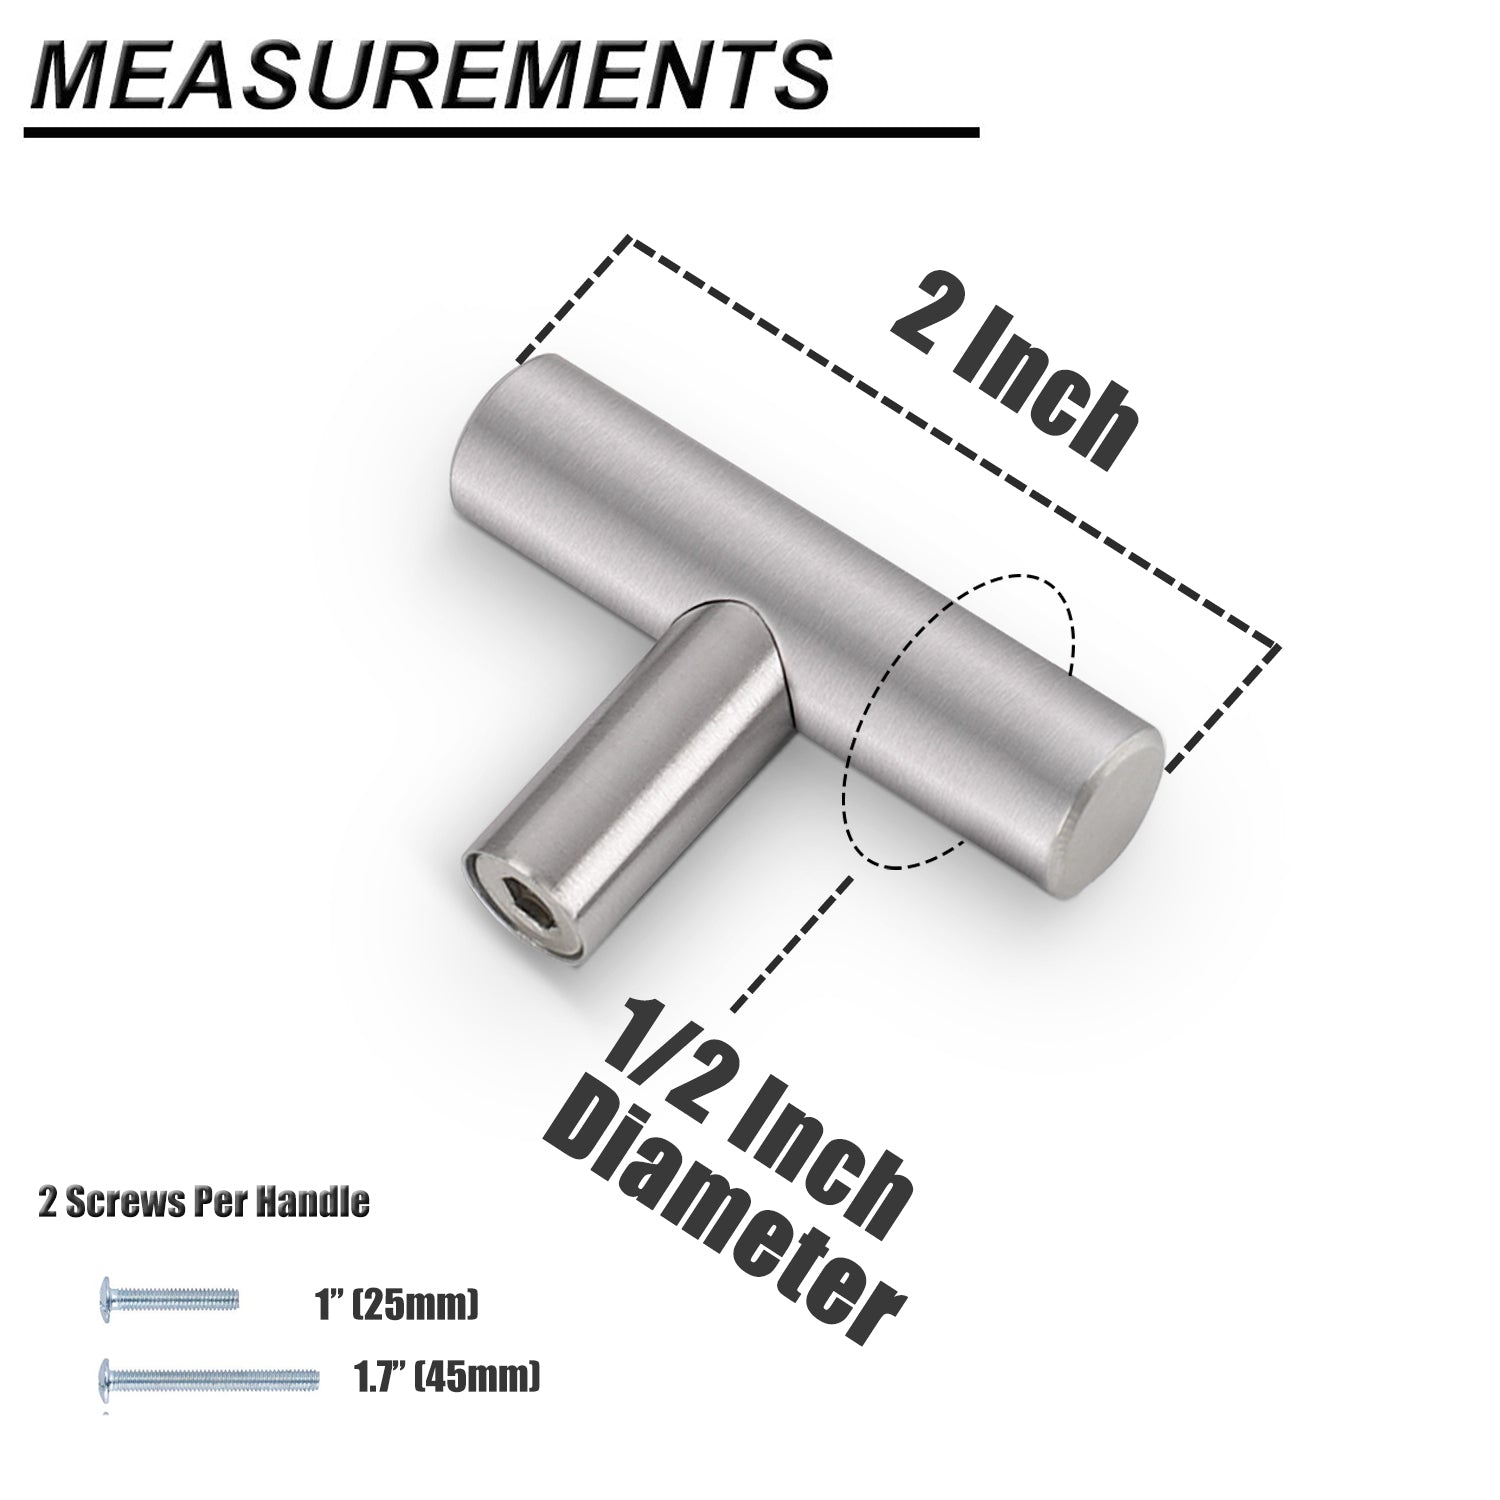 Satin Nickel All-in-One Measures